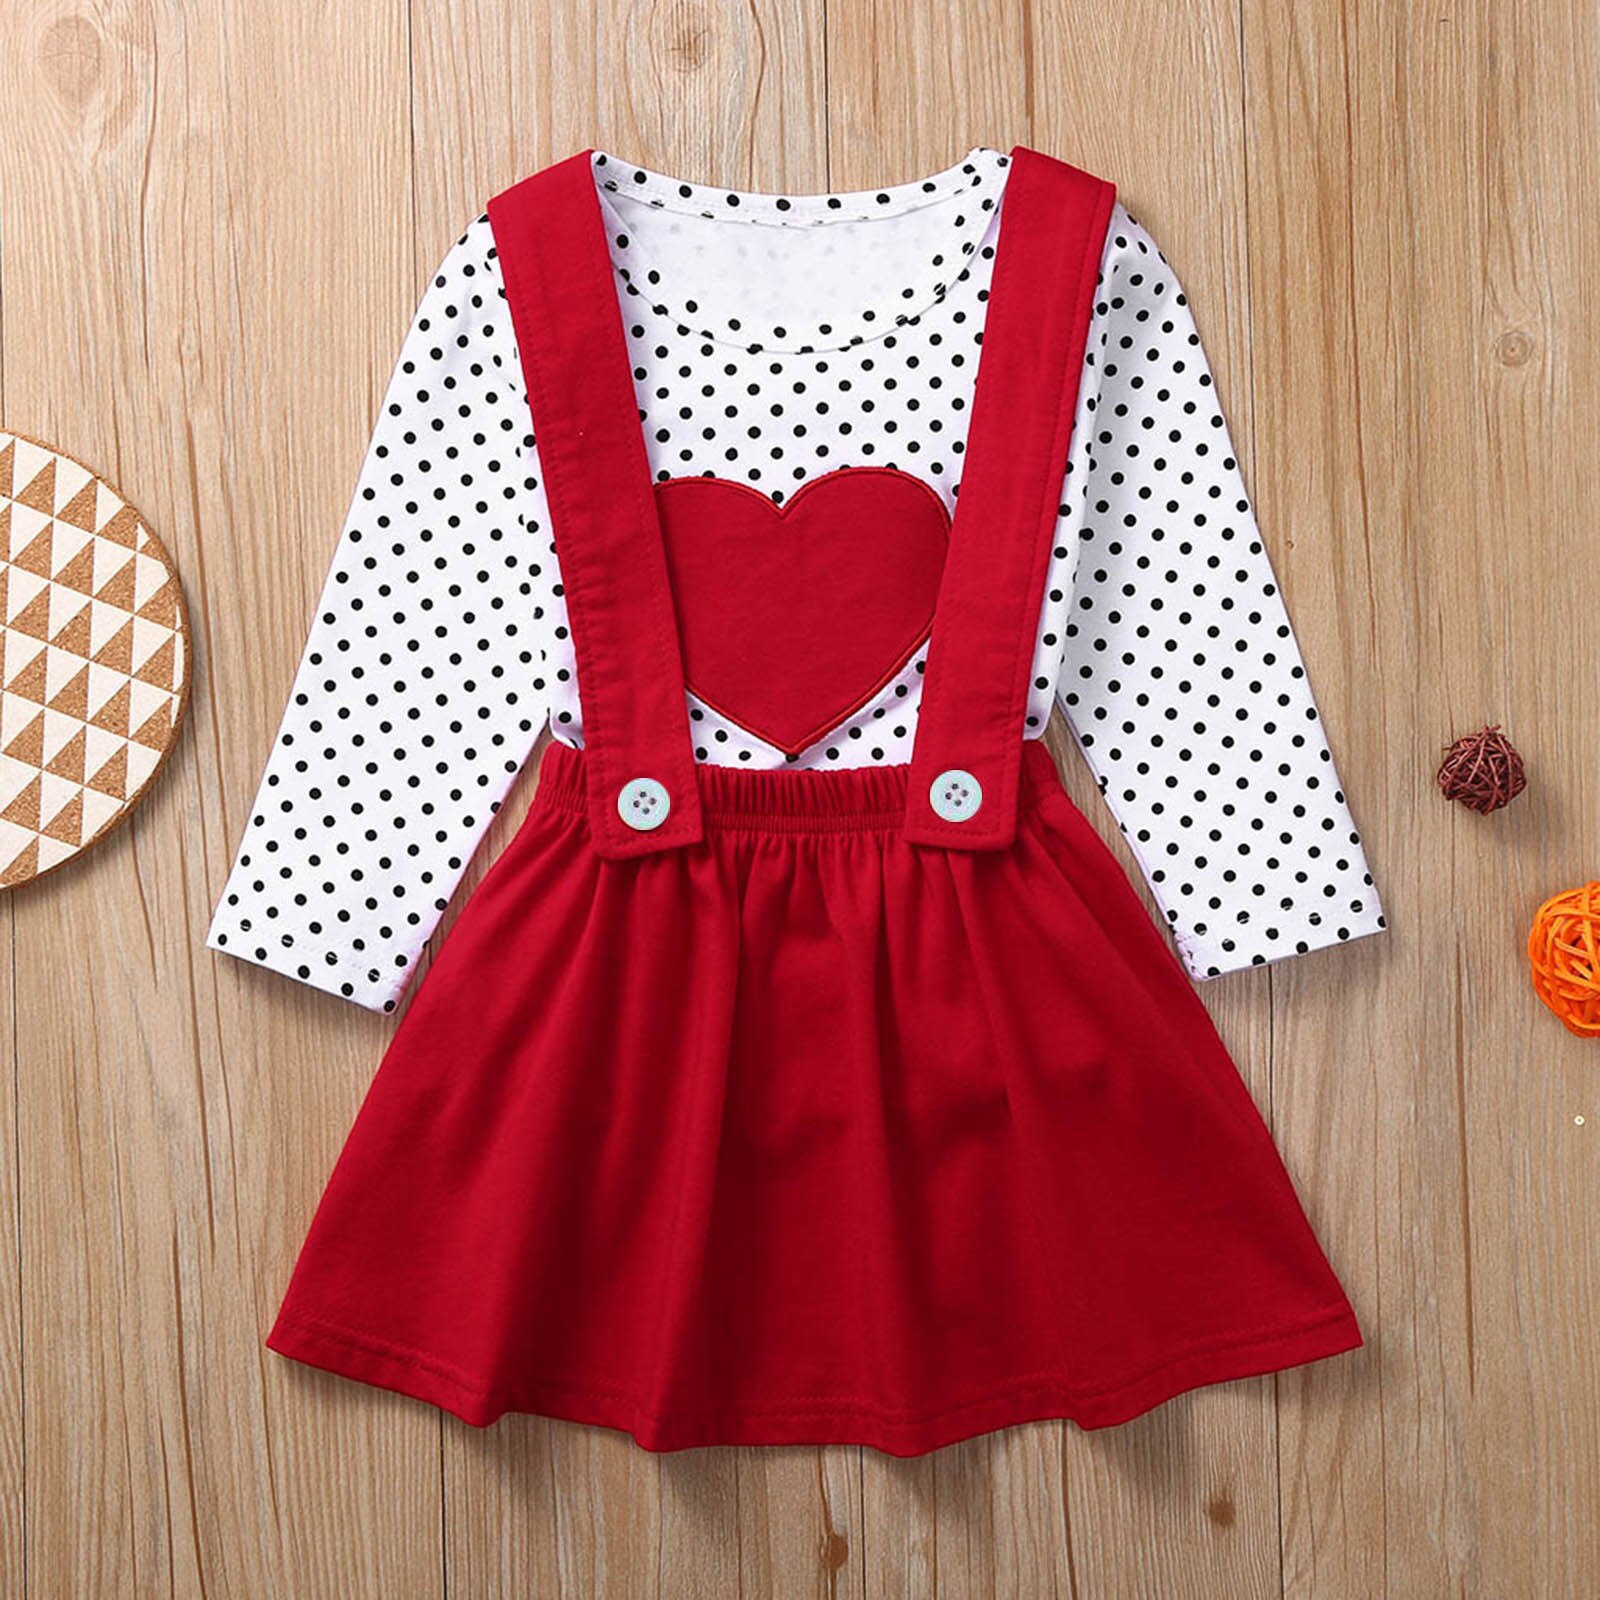 Toddler-Baby-Girls-Valentine-s-Day-Outfits-Spring-1-4-Years-Girls-Clothes-Set-Heart-Printed-2